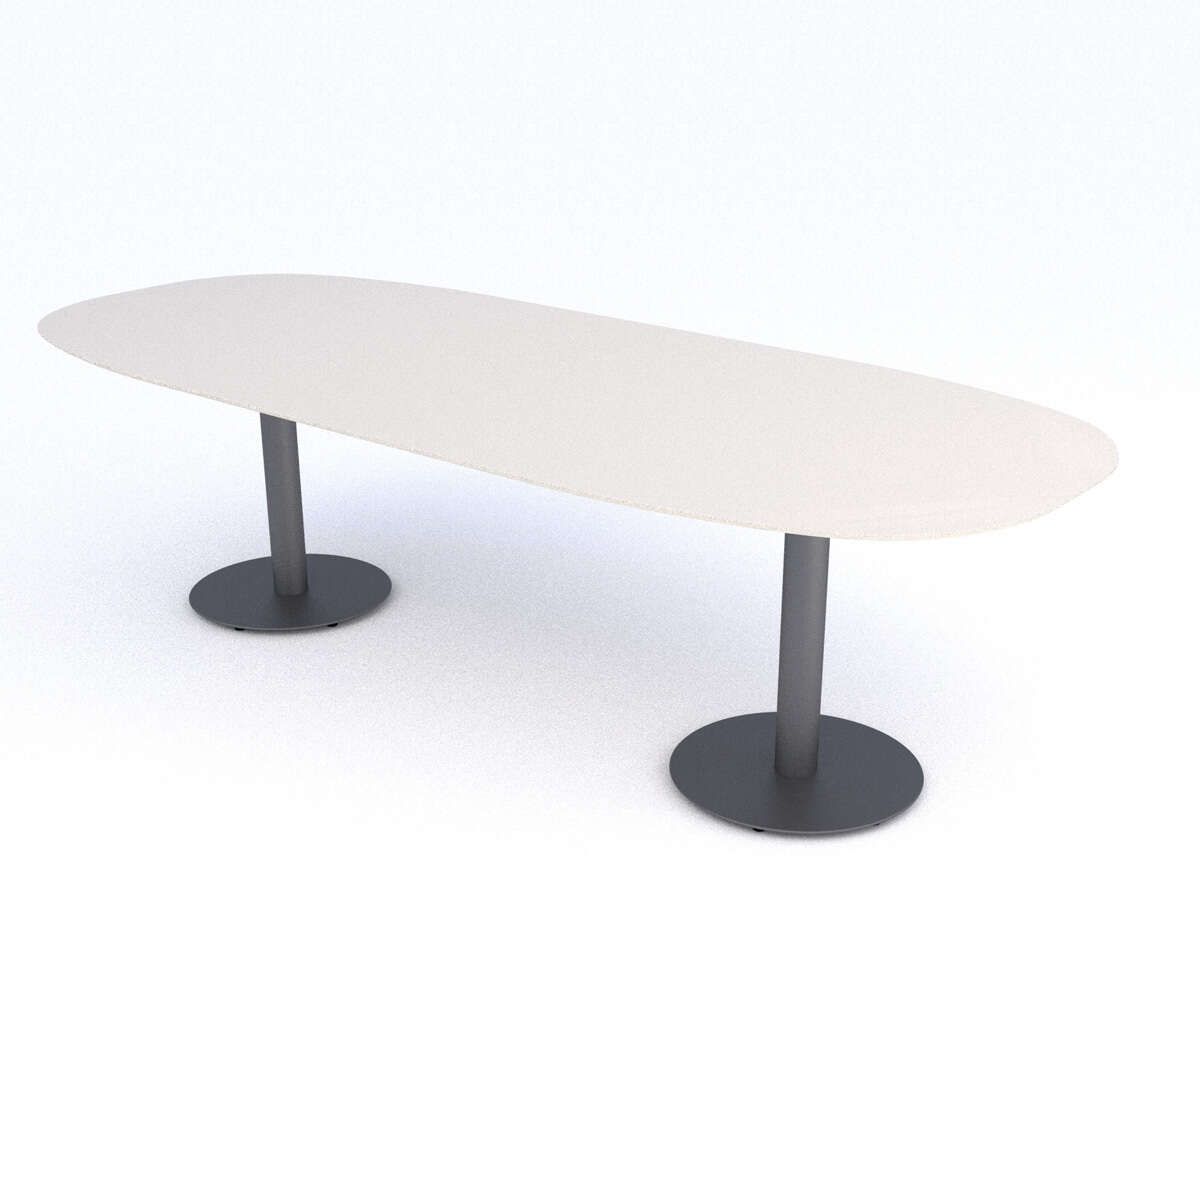 The Modern Garden Company | T Table Pertaining To White T Base Seminar Coffee Tables (View 7 of 15)